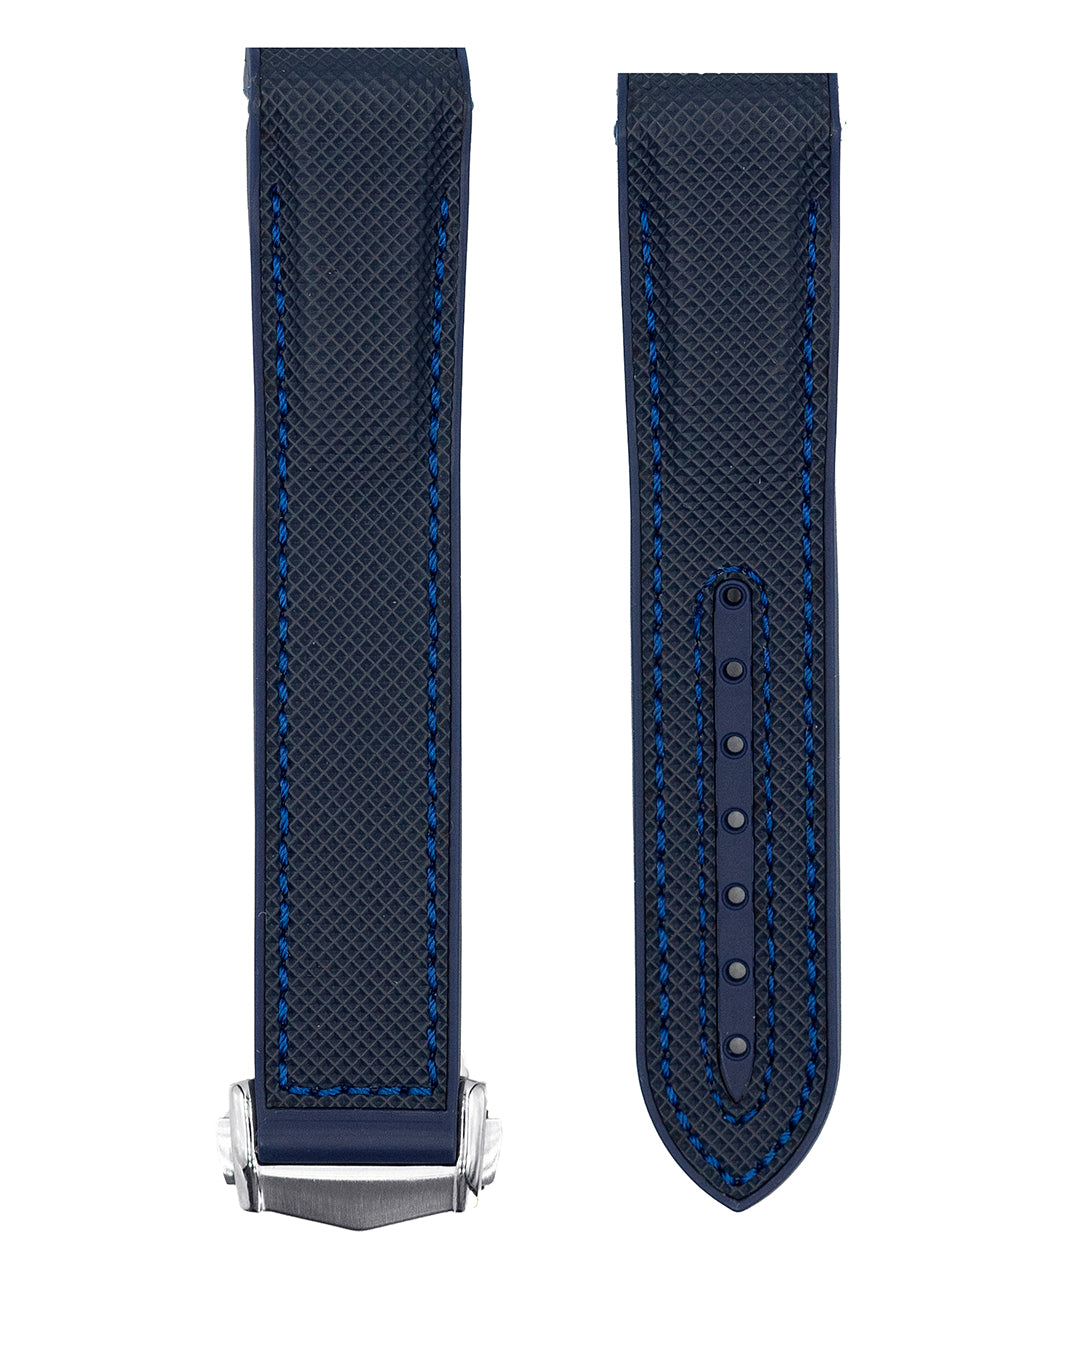 Fibre (rubber) Tag Heuer Watch Strap, Polly Packing, Size/Dimension:  Regular C Cut at Rs 75/piece in Mumbai